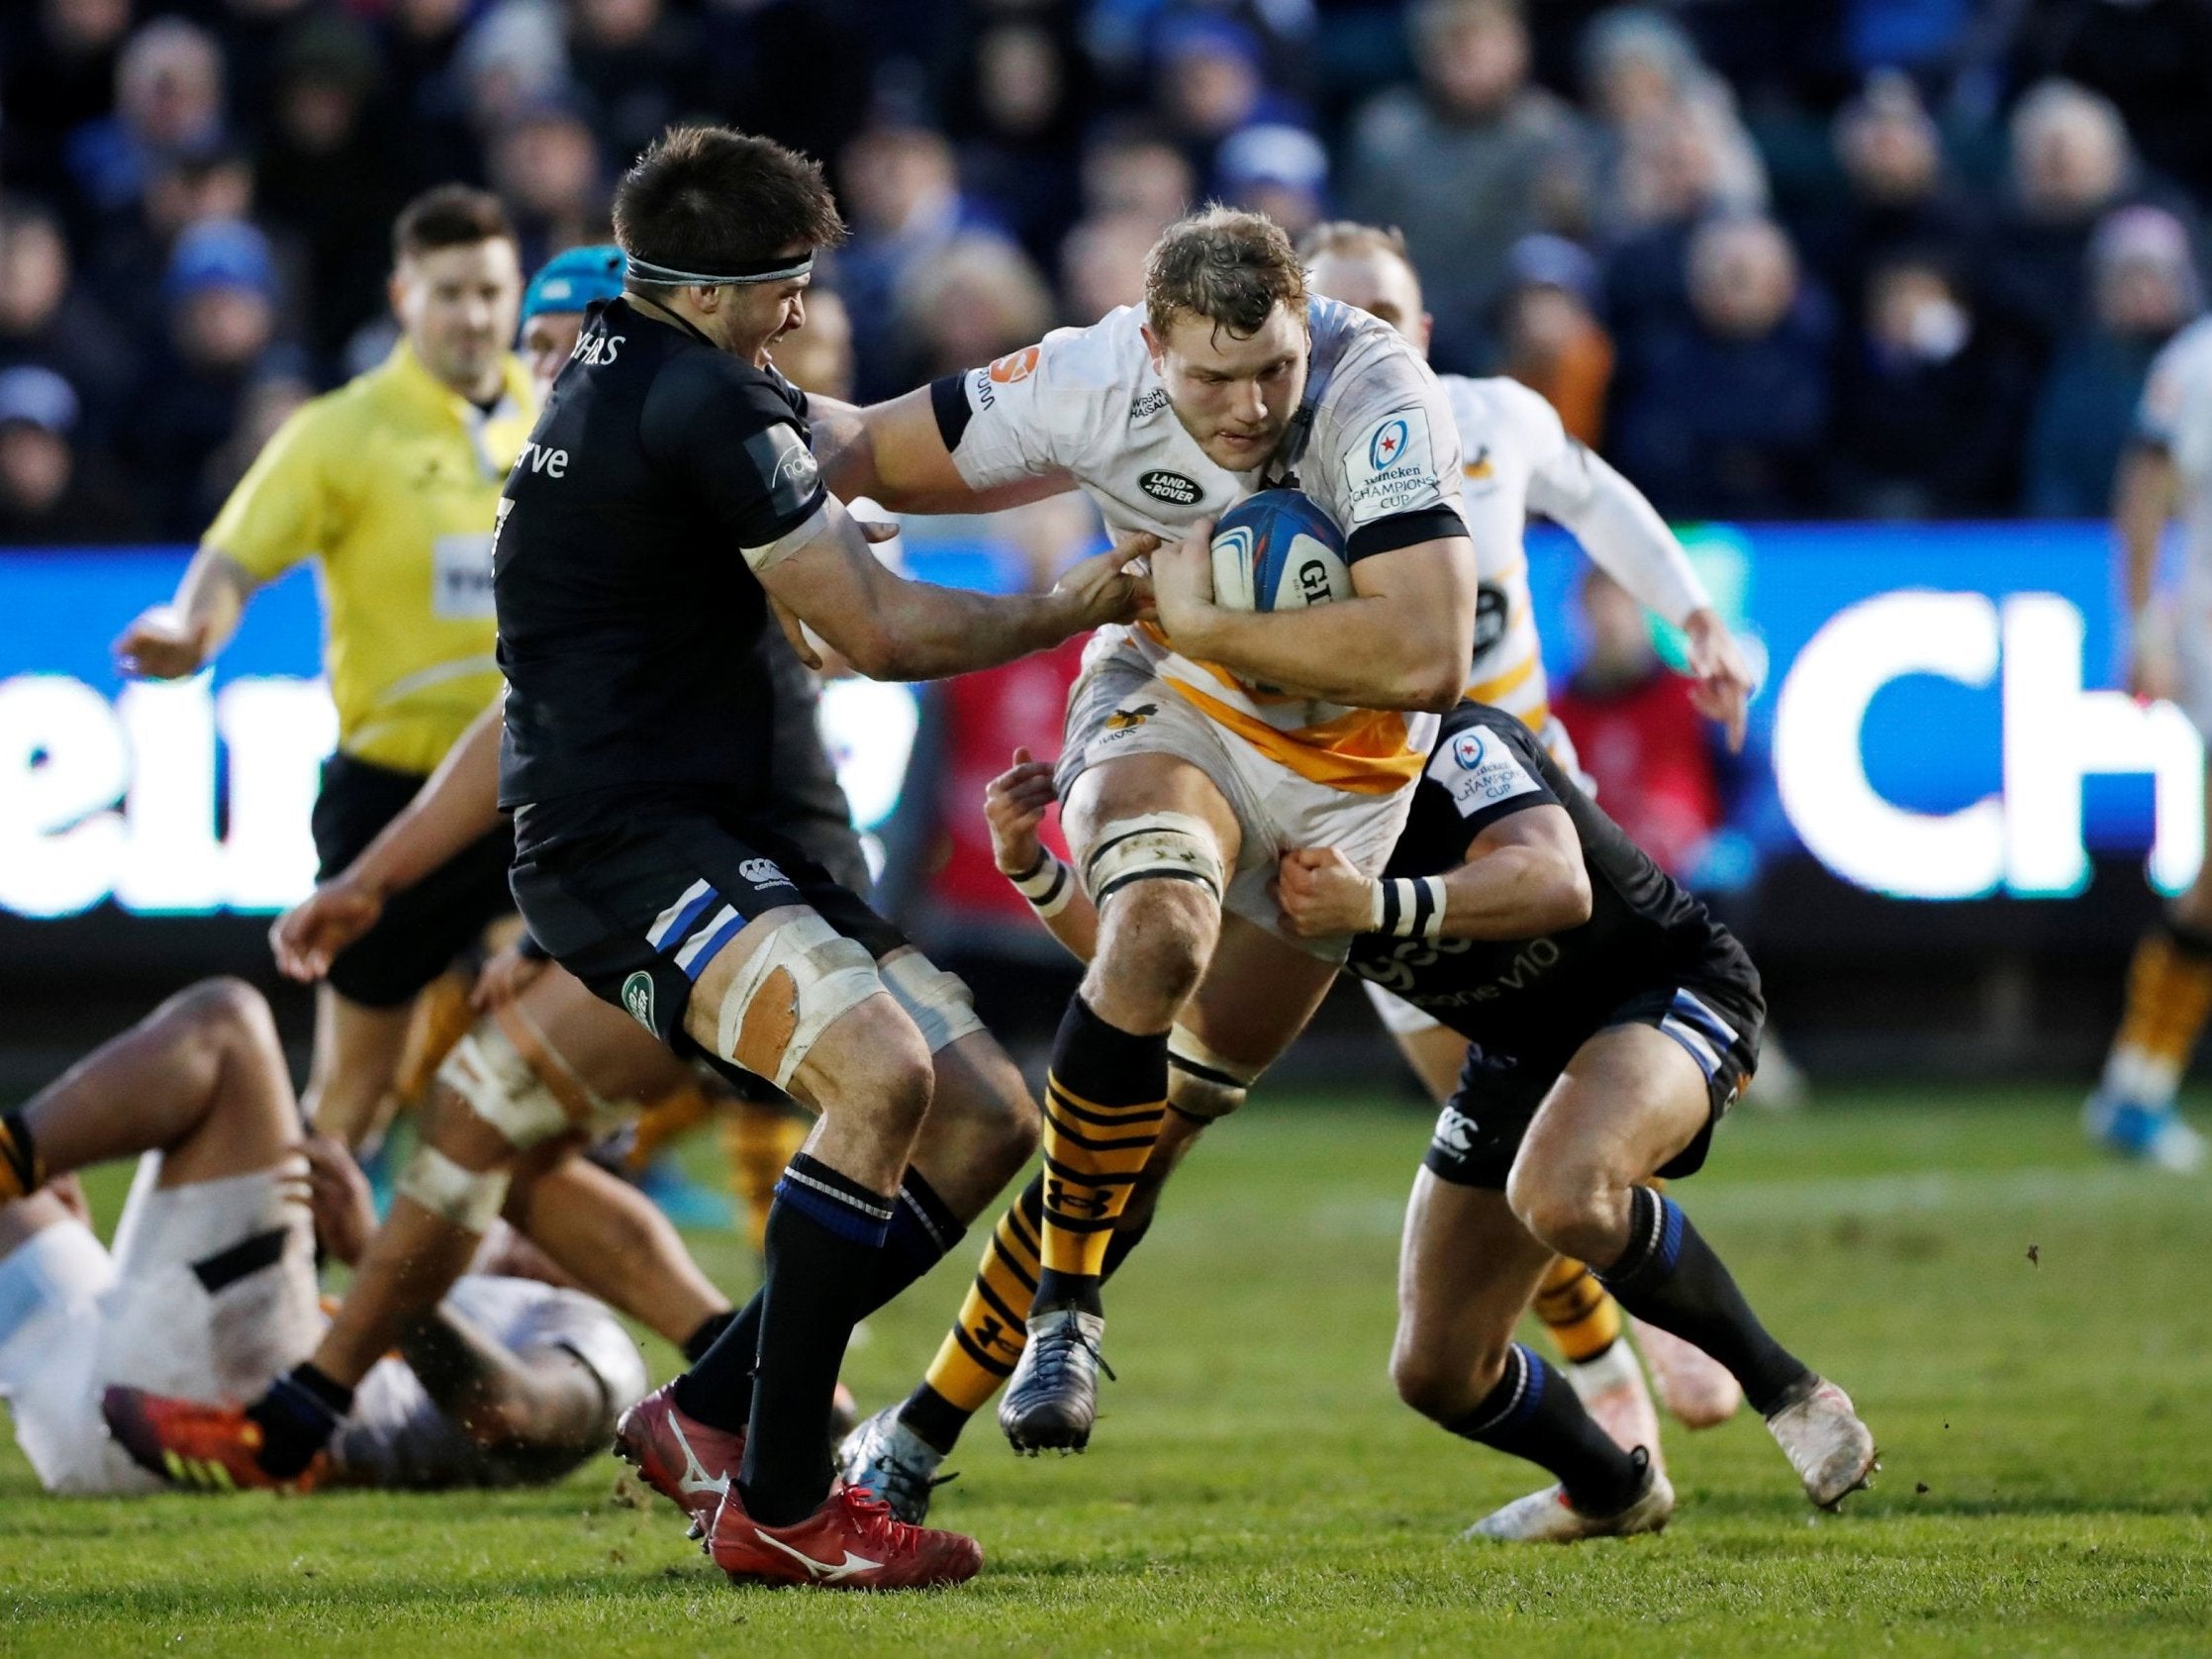 Joe Launchbury returned from injury for Wasps but could not prevent the defeat